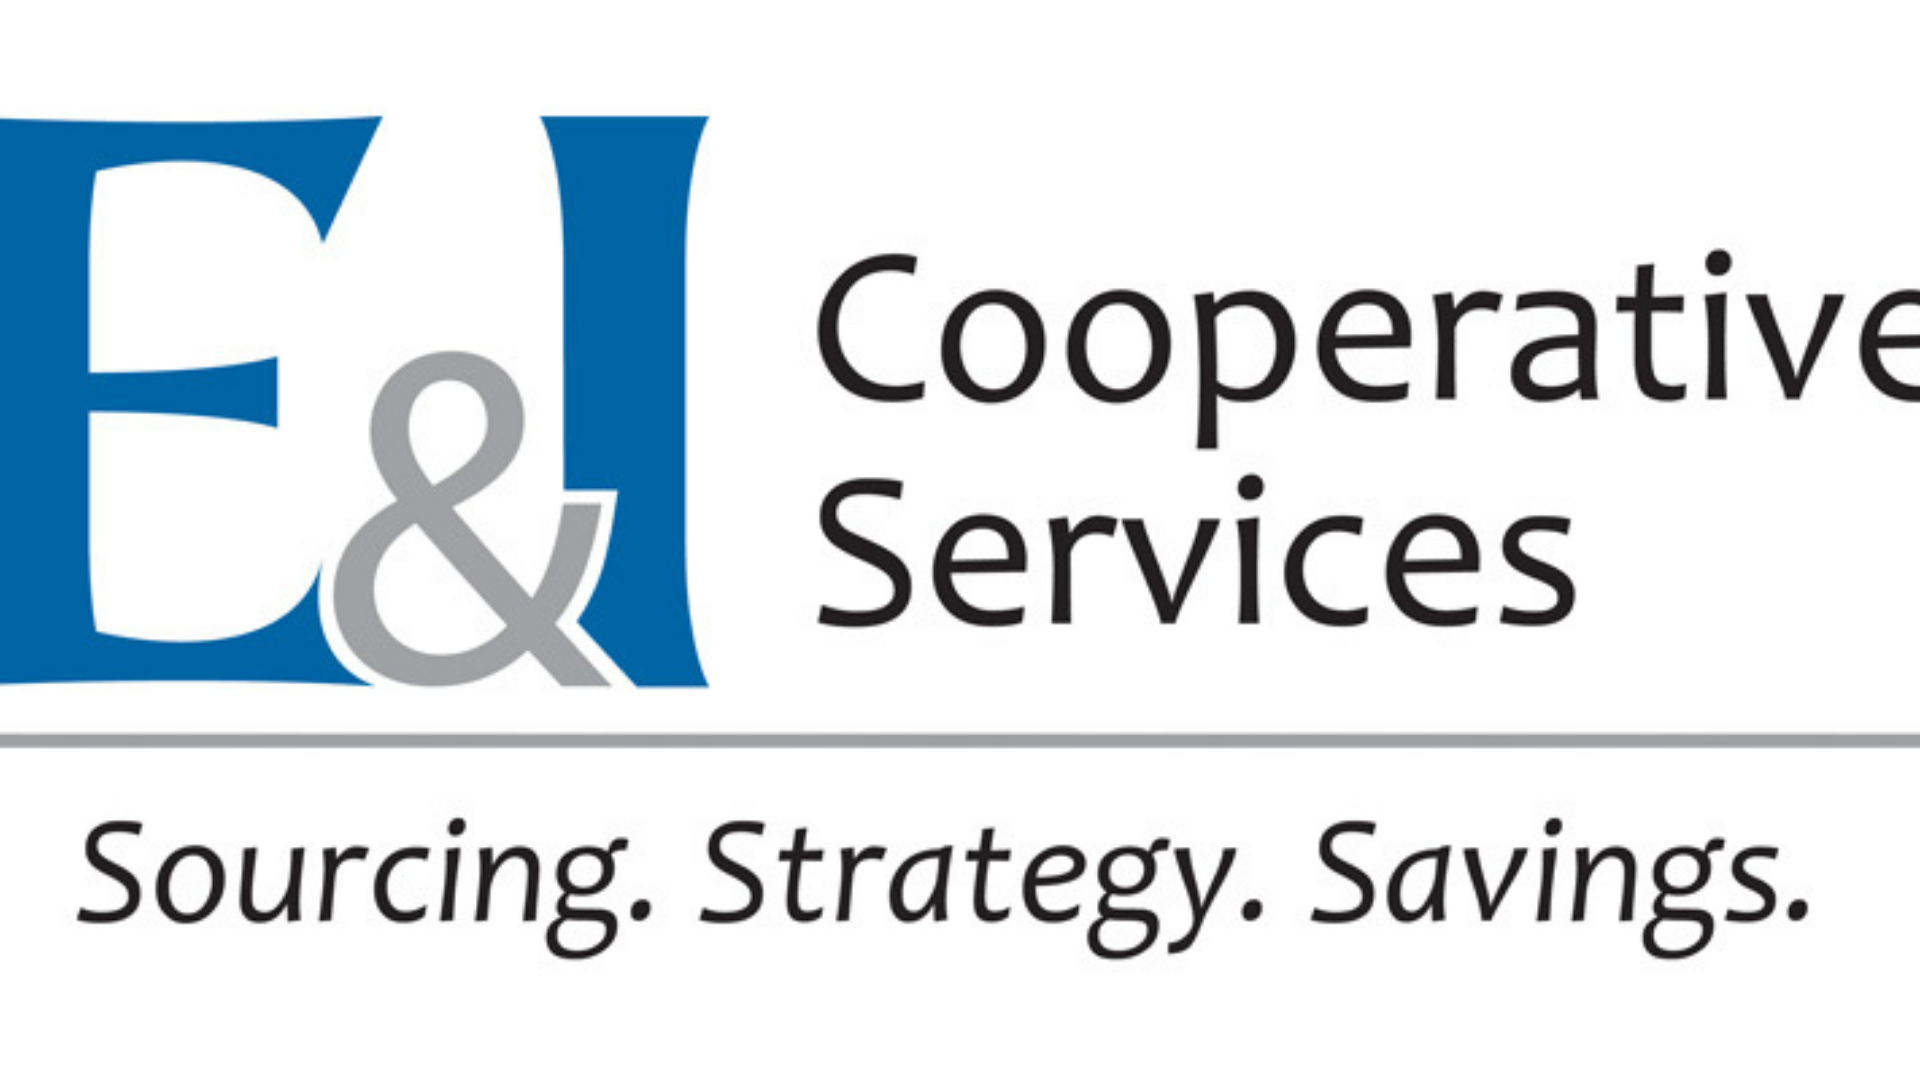 E&I Cooperative Services Selects Columbia Advisory Group for IT Services